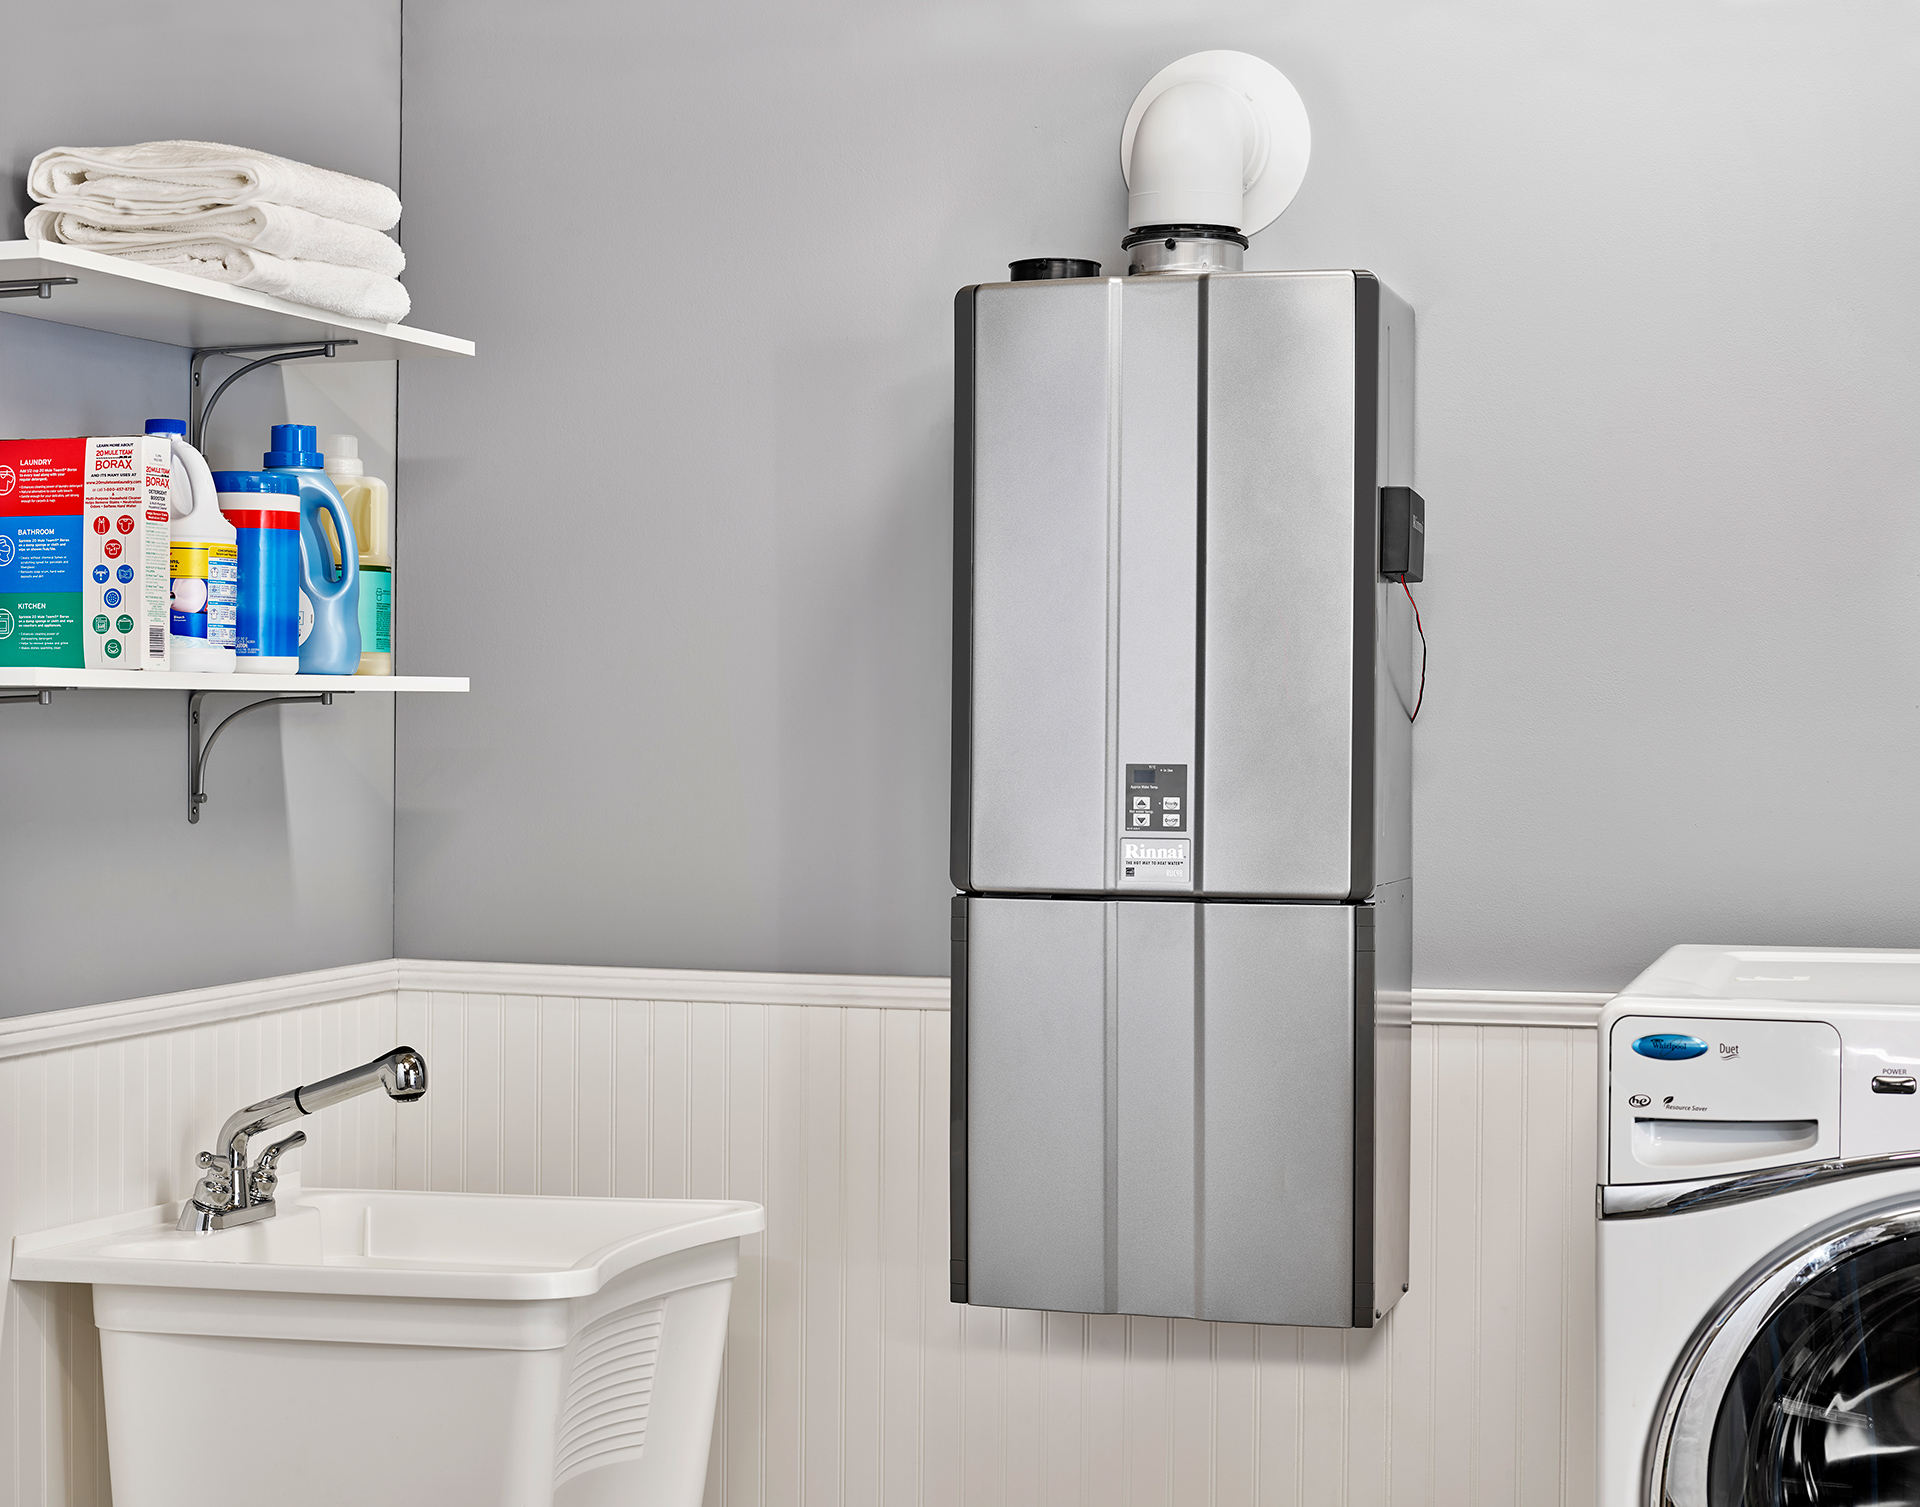 Adding to Rinnai’s roster of products that offer smart home system compatibility, the company’s tankless gas water heaters are now Google Home-compatible and can be used with Amazon’s Alexa voice assistant. The updated Control-R 2.0 module and mobile app includes more than 20 voice commands to select and schedule temperatures or turn on the hot water recirculation system.